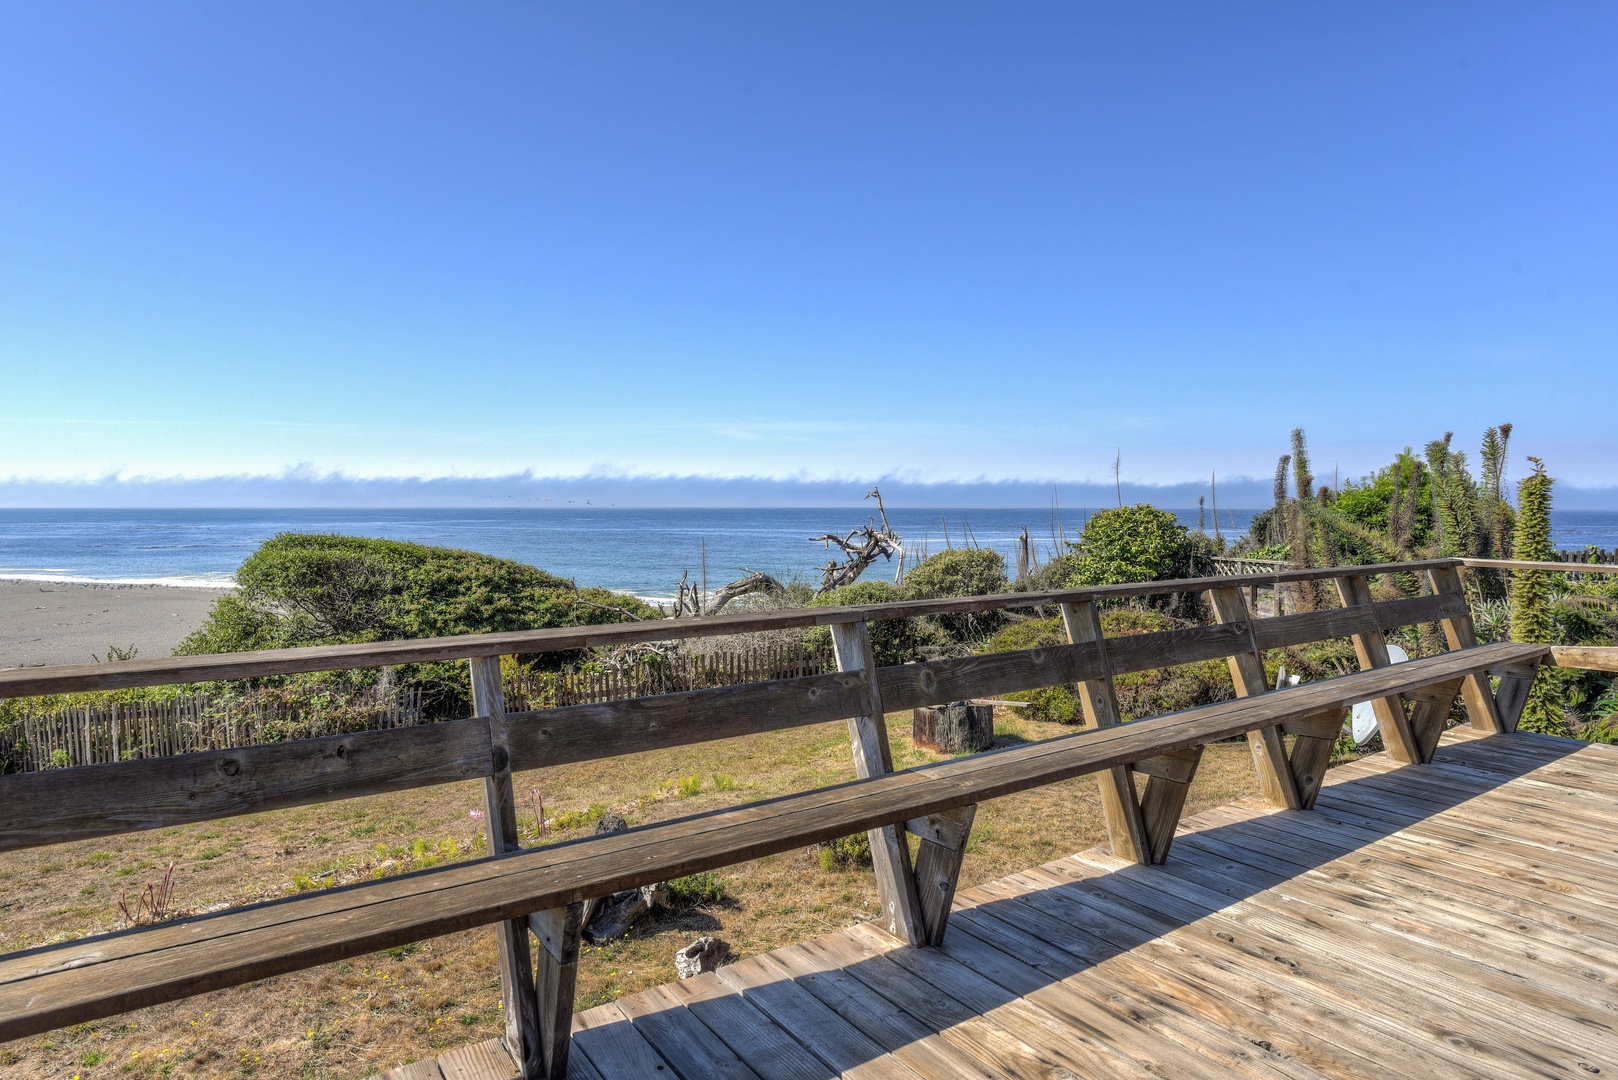 Private deck with ocean views, BBQ, and patio seating